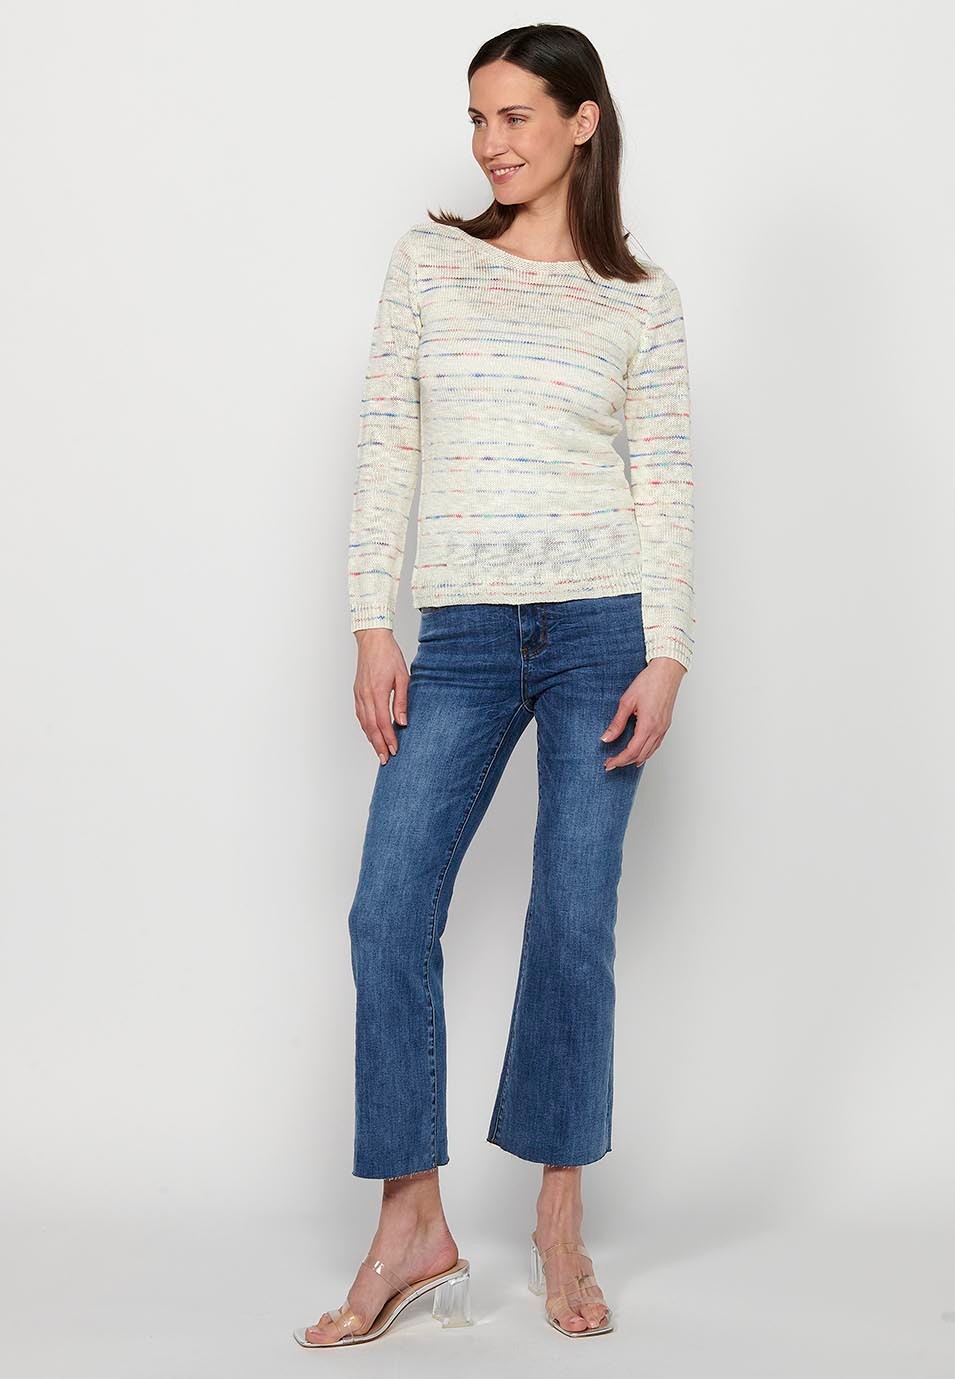 Long-sleeved, round-neck, off-white heather sweater for women